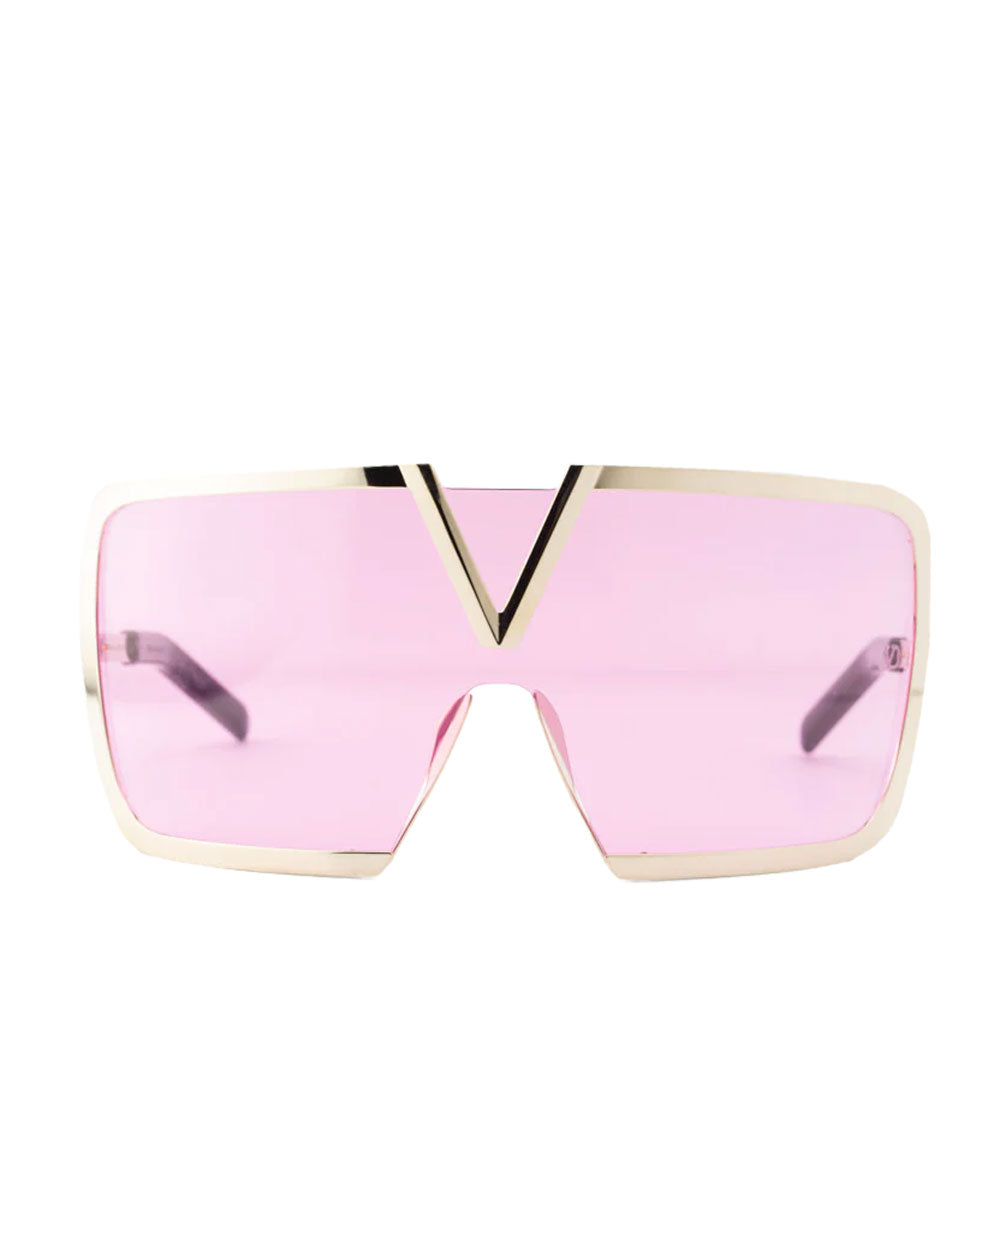 Romask Sunglasses in Pink